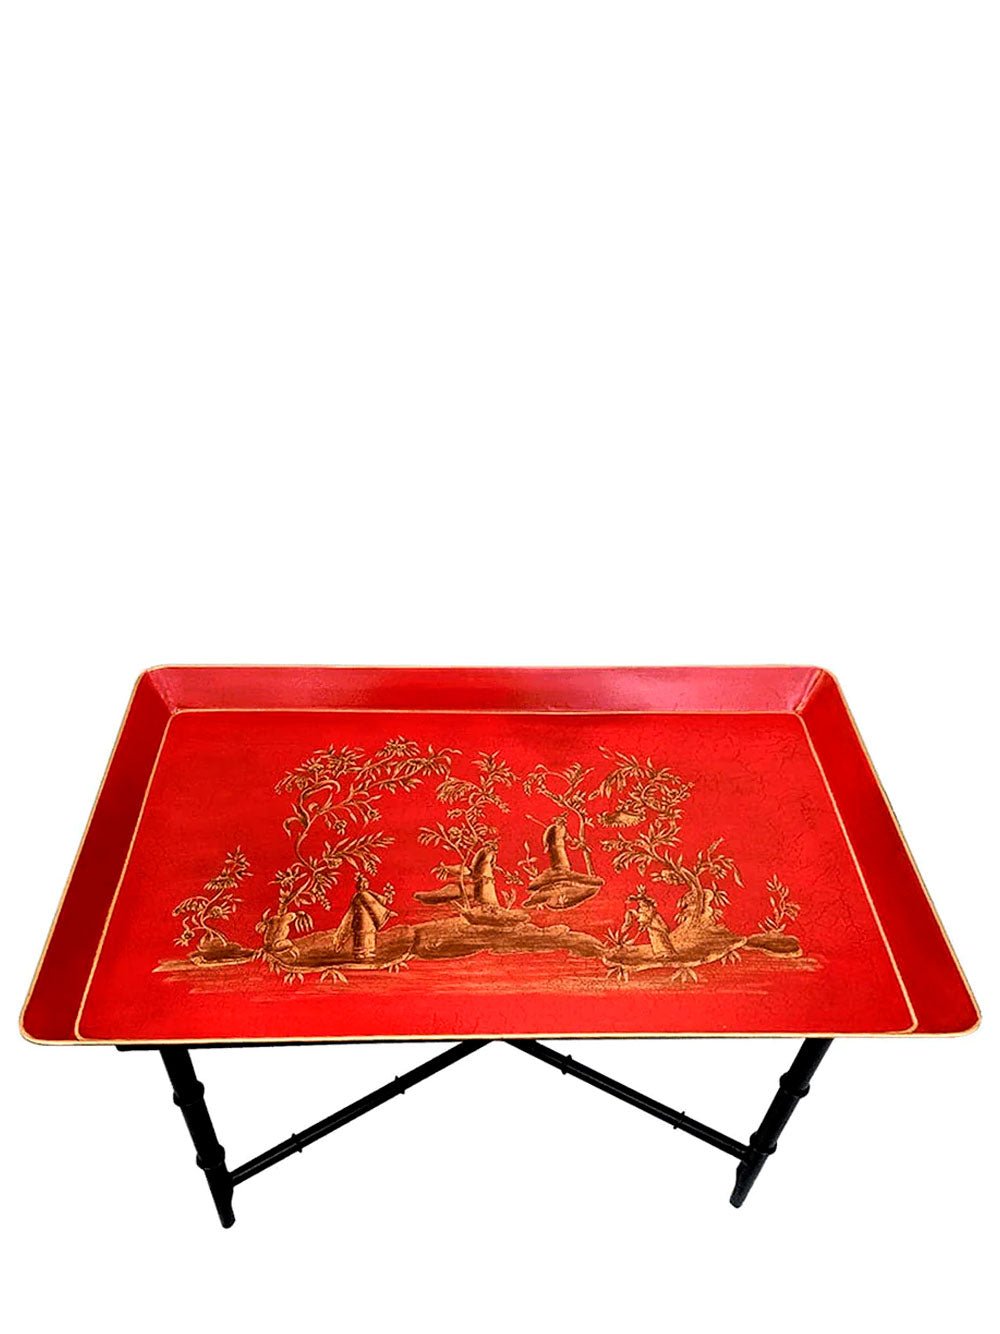 Les OttomansChinoiserie coffee table at Fashion Clinic